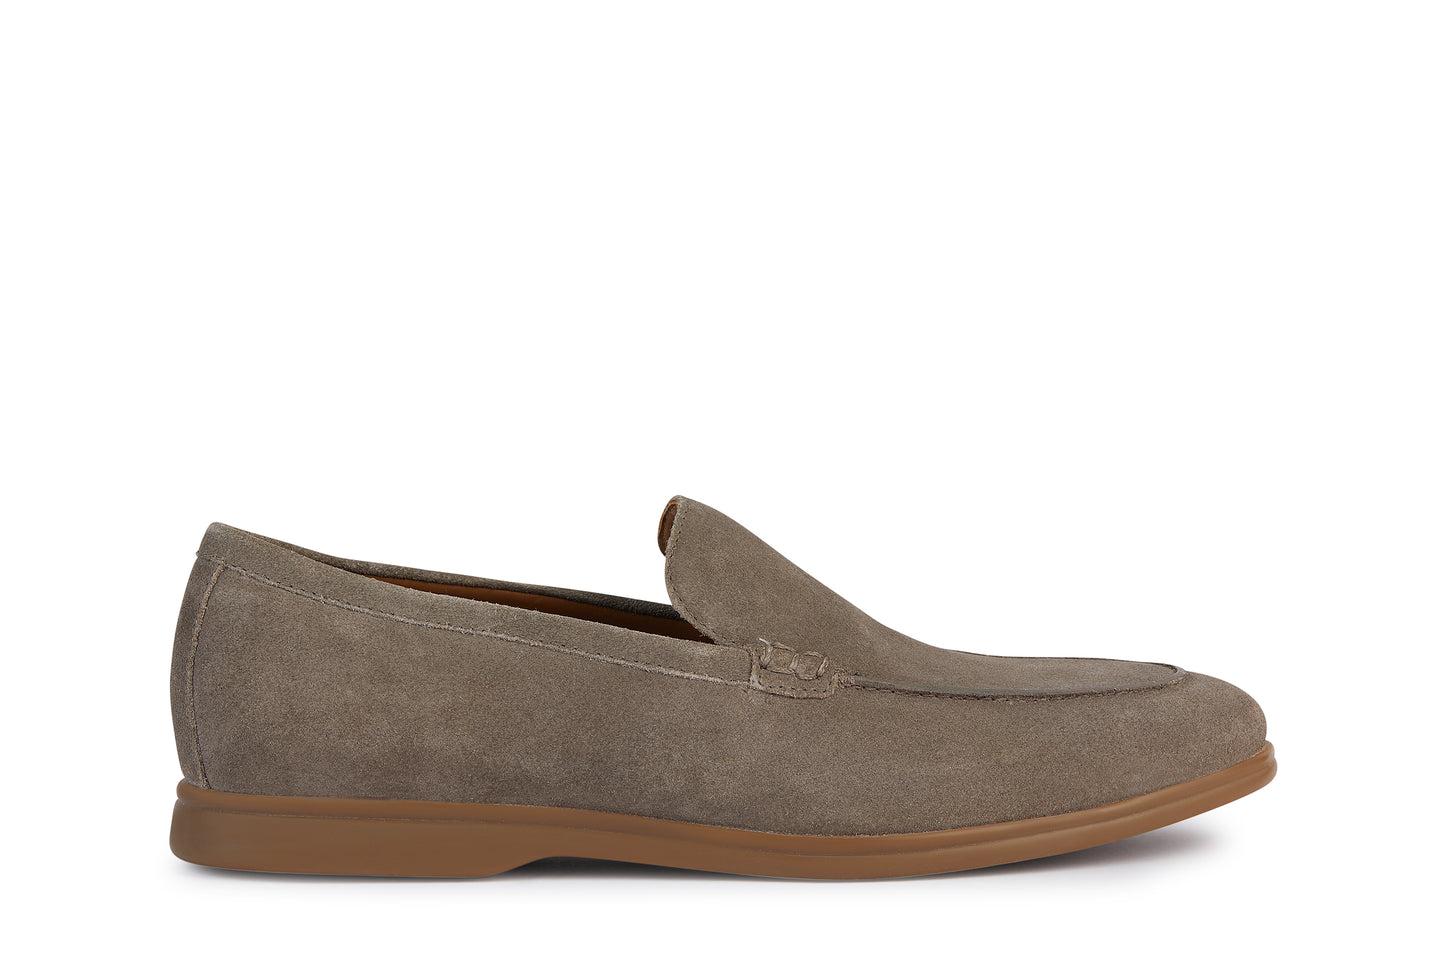 Geox Venzone Suede Moccasins - Taupe